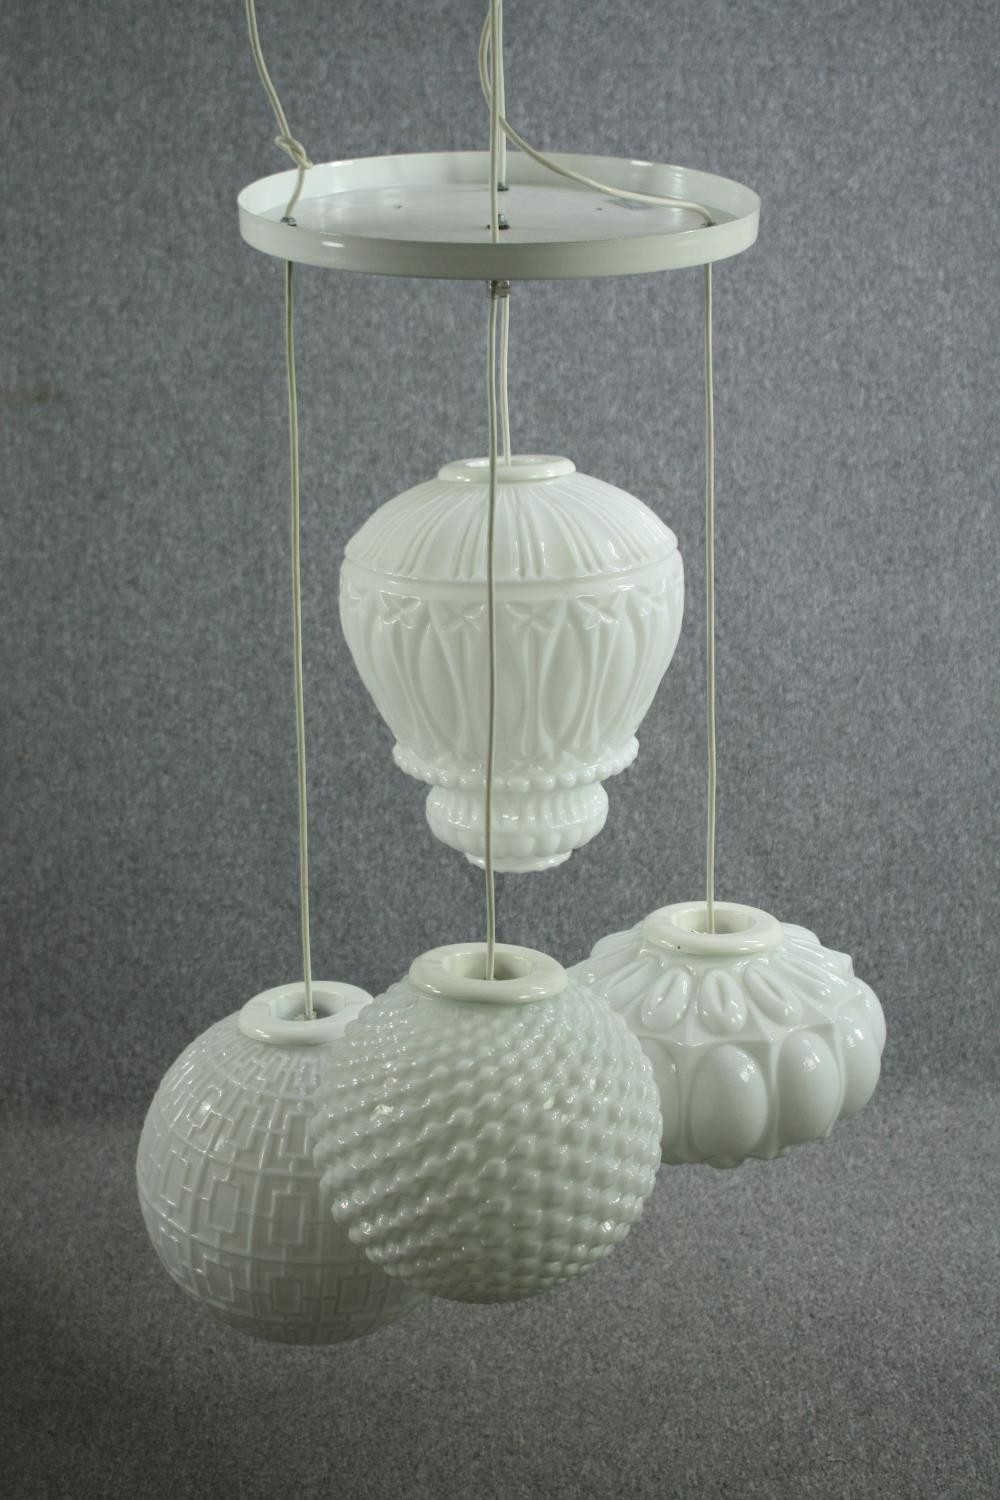 An arabesque chandelier by Mm Design. Four adjustable white glass shades each a different shape